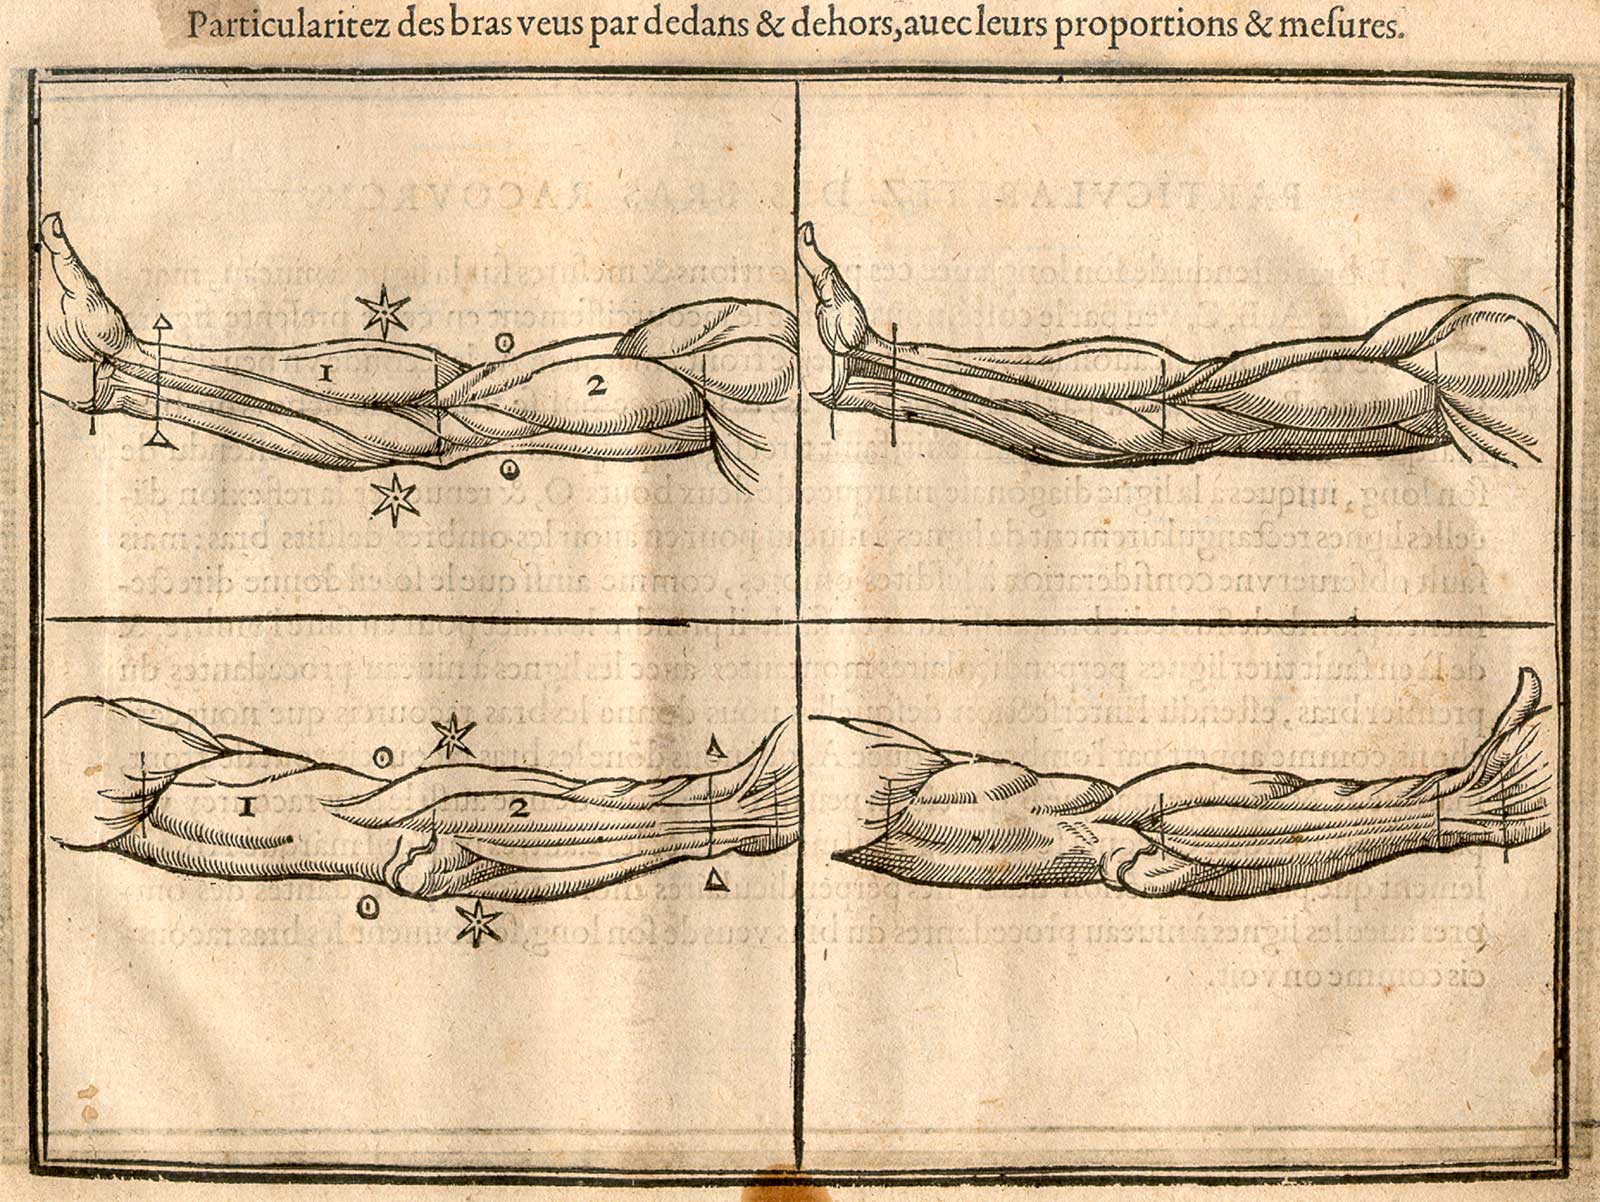 Woodcut illustration of four images of details of the musculature of the male arm, the upper two show the inside of an arm outstretched to the left, the lower two show the outside of an arm outstretched to the right, all with markers showing the length proportions of the parts, from Jehan Cousin’s Livre de pourtraiture, NLM Call no.: WZ 250 C8673L 1608.